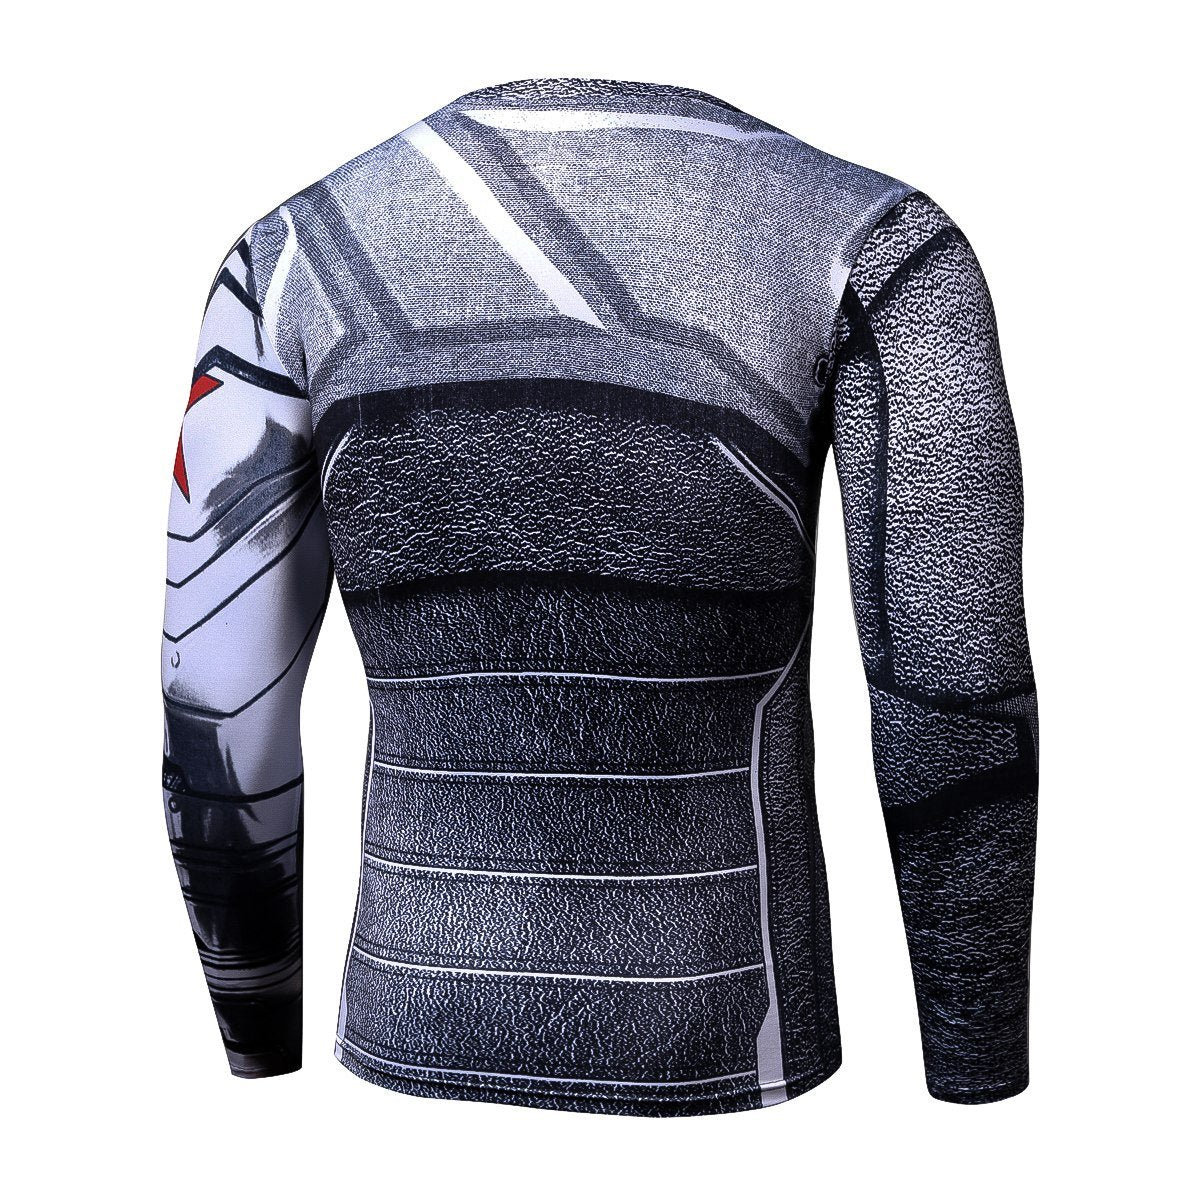 WINTER SOLDIER Compression Shirt for Women (Long Sleeve)